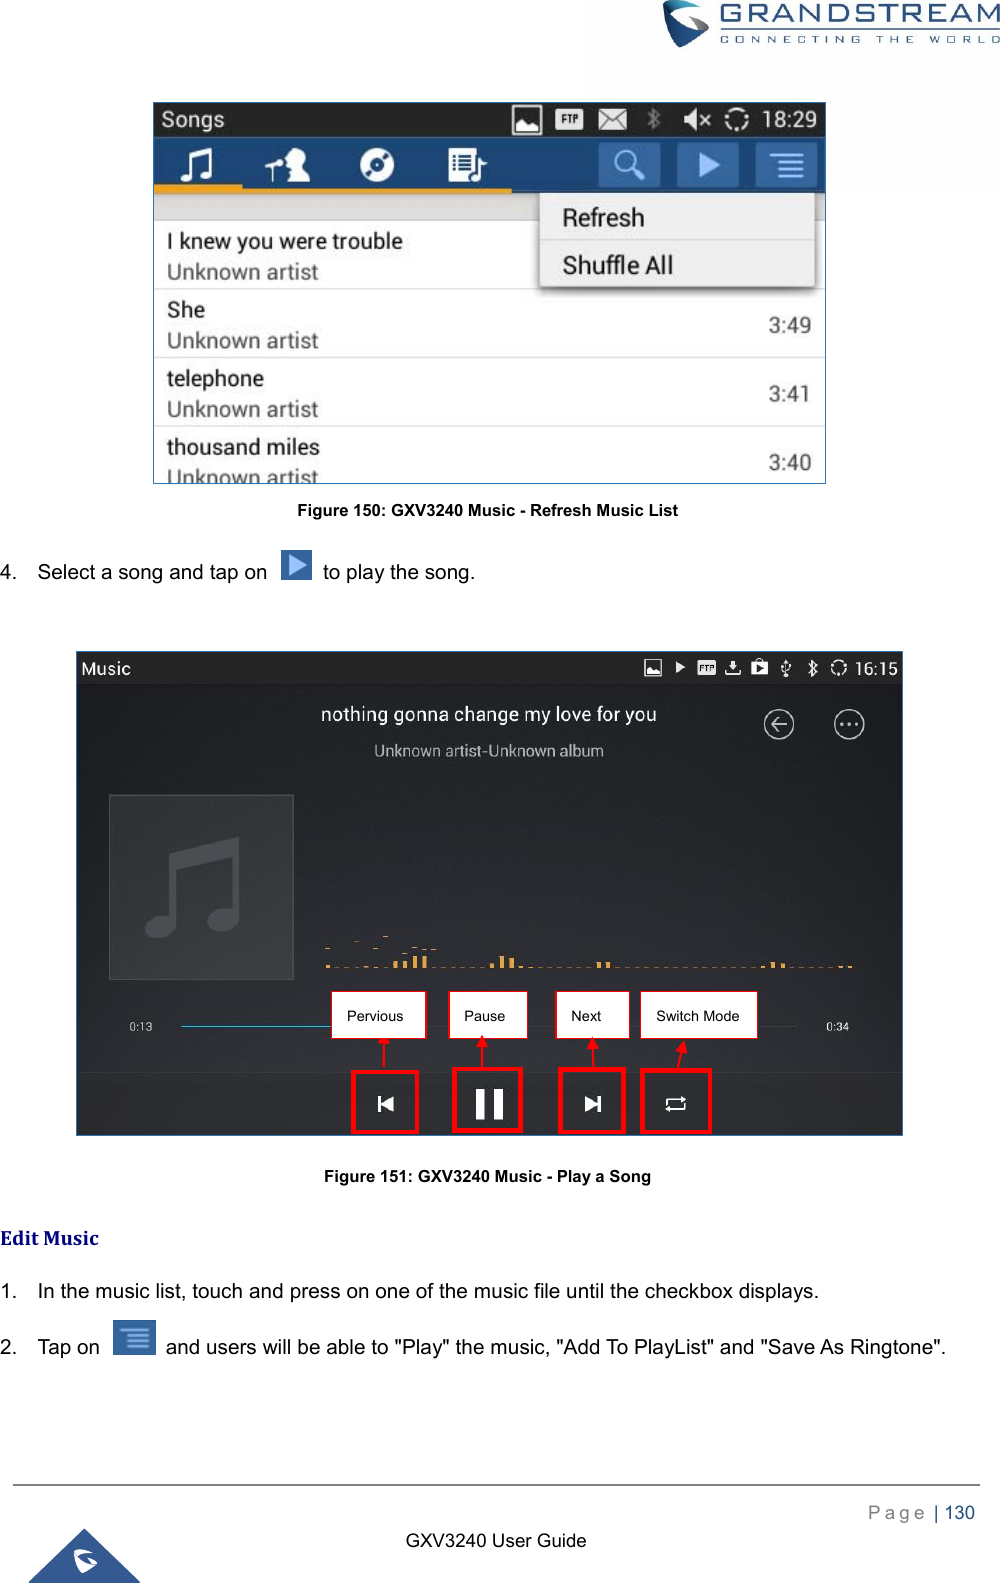    P a g e  | 130    GXV3240 User Guide   Figure 150: GXV3240 Music - Refresh Music List 4.  Select a song and tap on    to play the song.     Figure 151: GXV3240 Music - Play a Song Edit Music 1.  In the music list, touch and press on one of the music file until the checkbox displays. 2.  Tap on    and users will be able to &quot;Play&quot; the music, &quot;Add To PlayList&quot; and &quot;Save As Ringtone&quot;. Pervious  Pause  Next  Switch Mode 